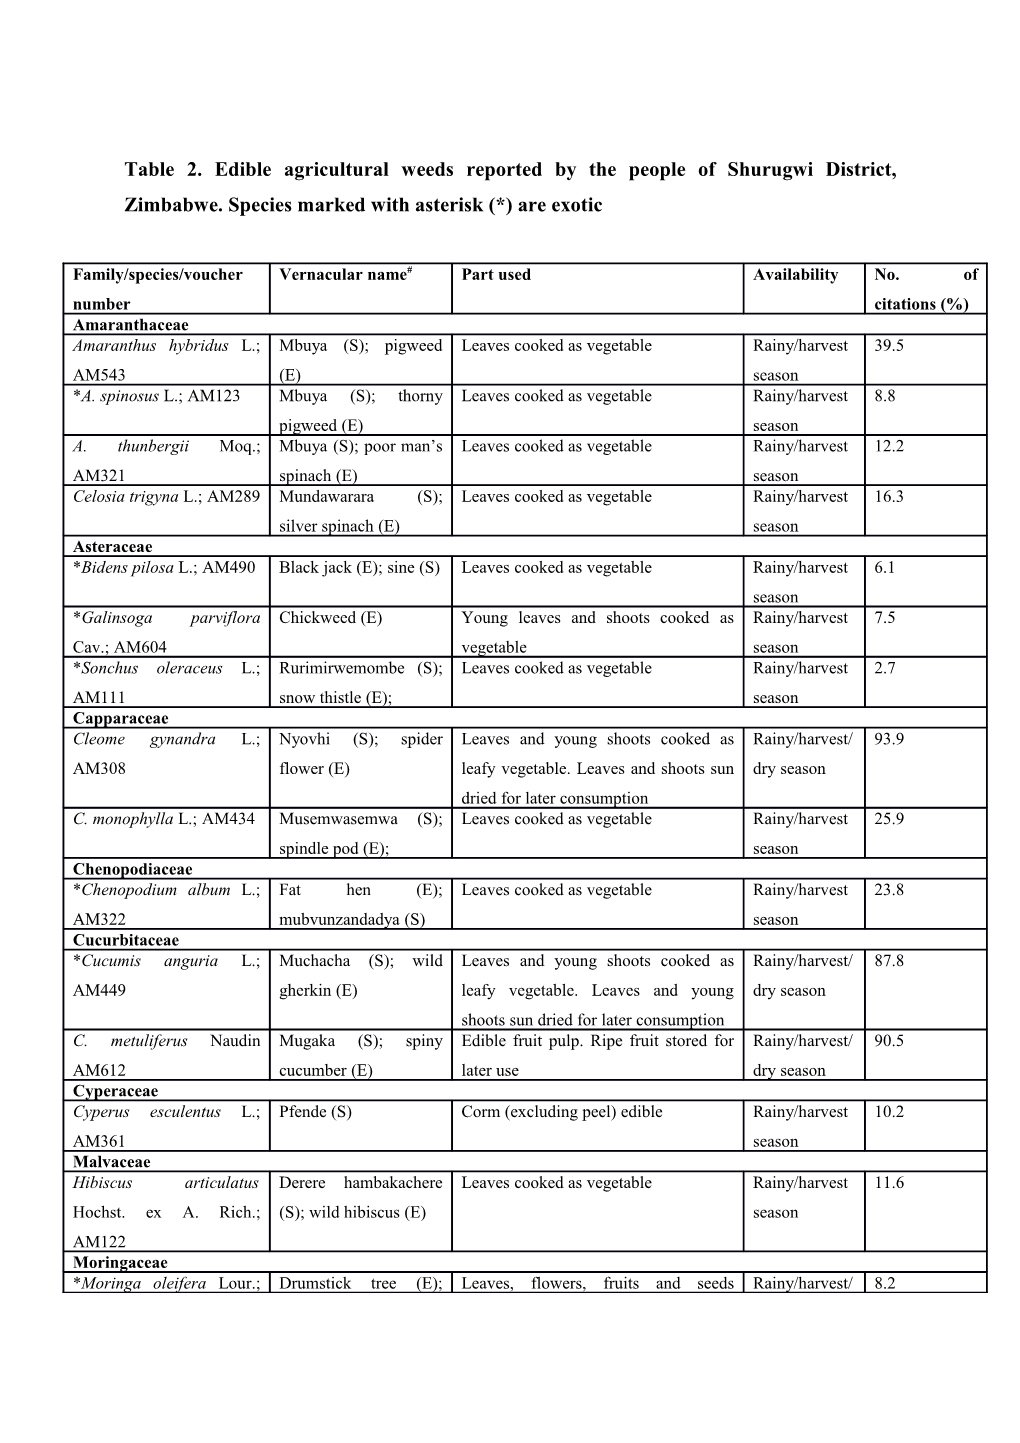 Table 2. Edible Agricultural Weeds Reported by the People of Shurugwi District, Zimbabwe